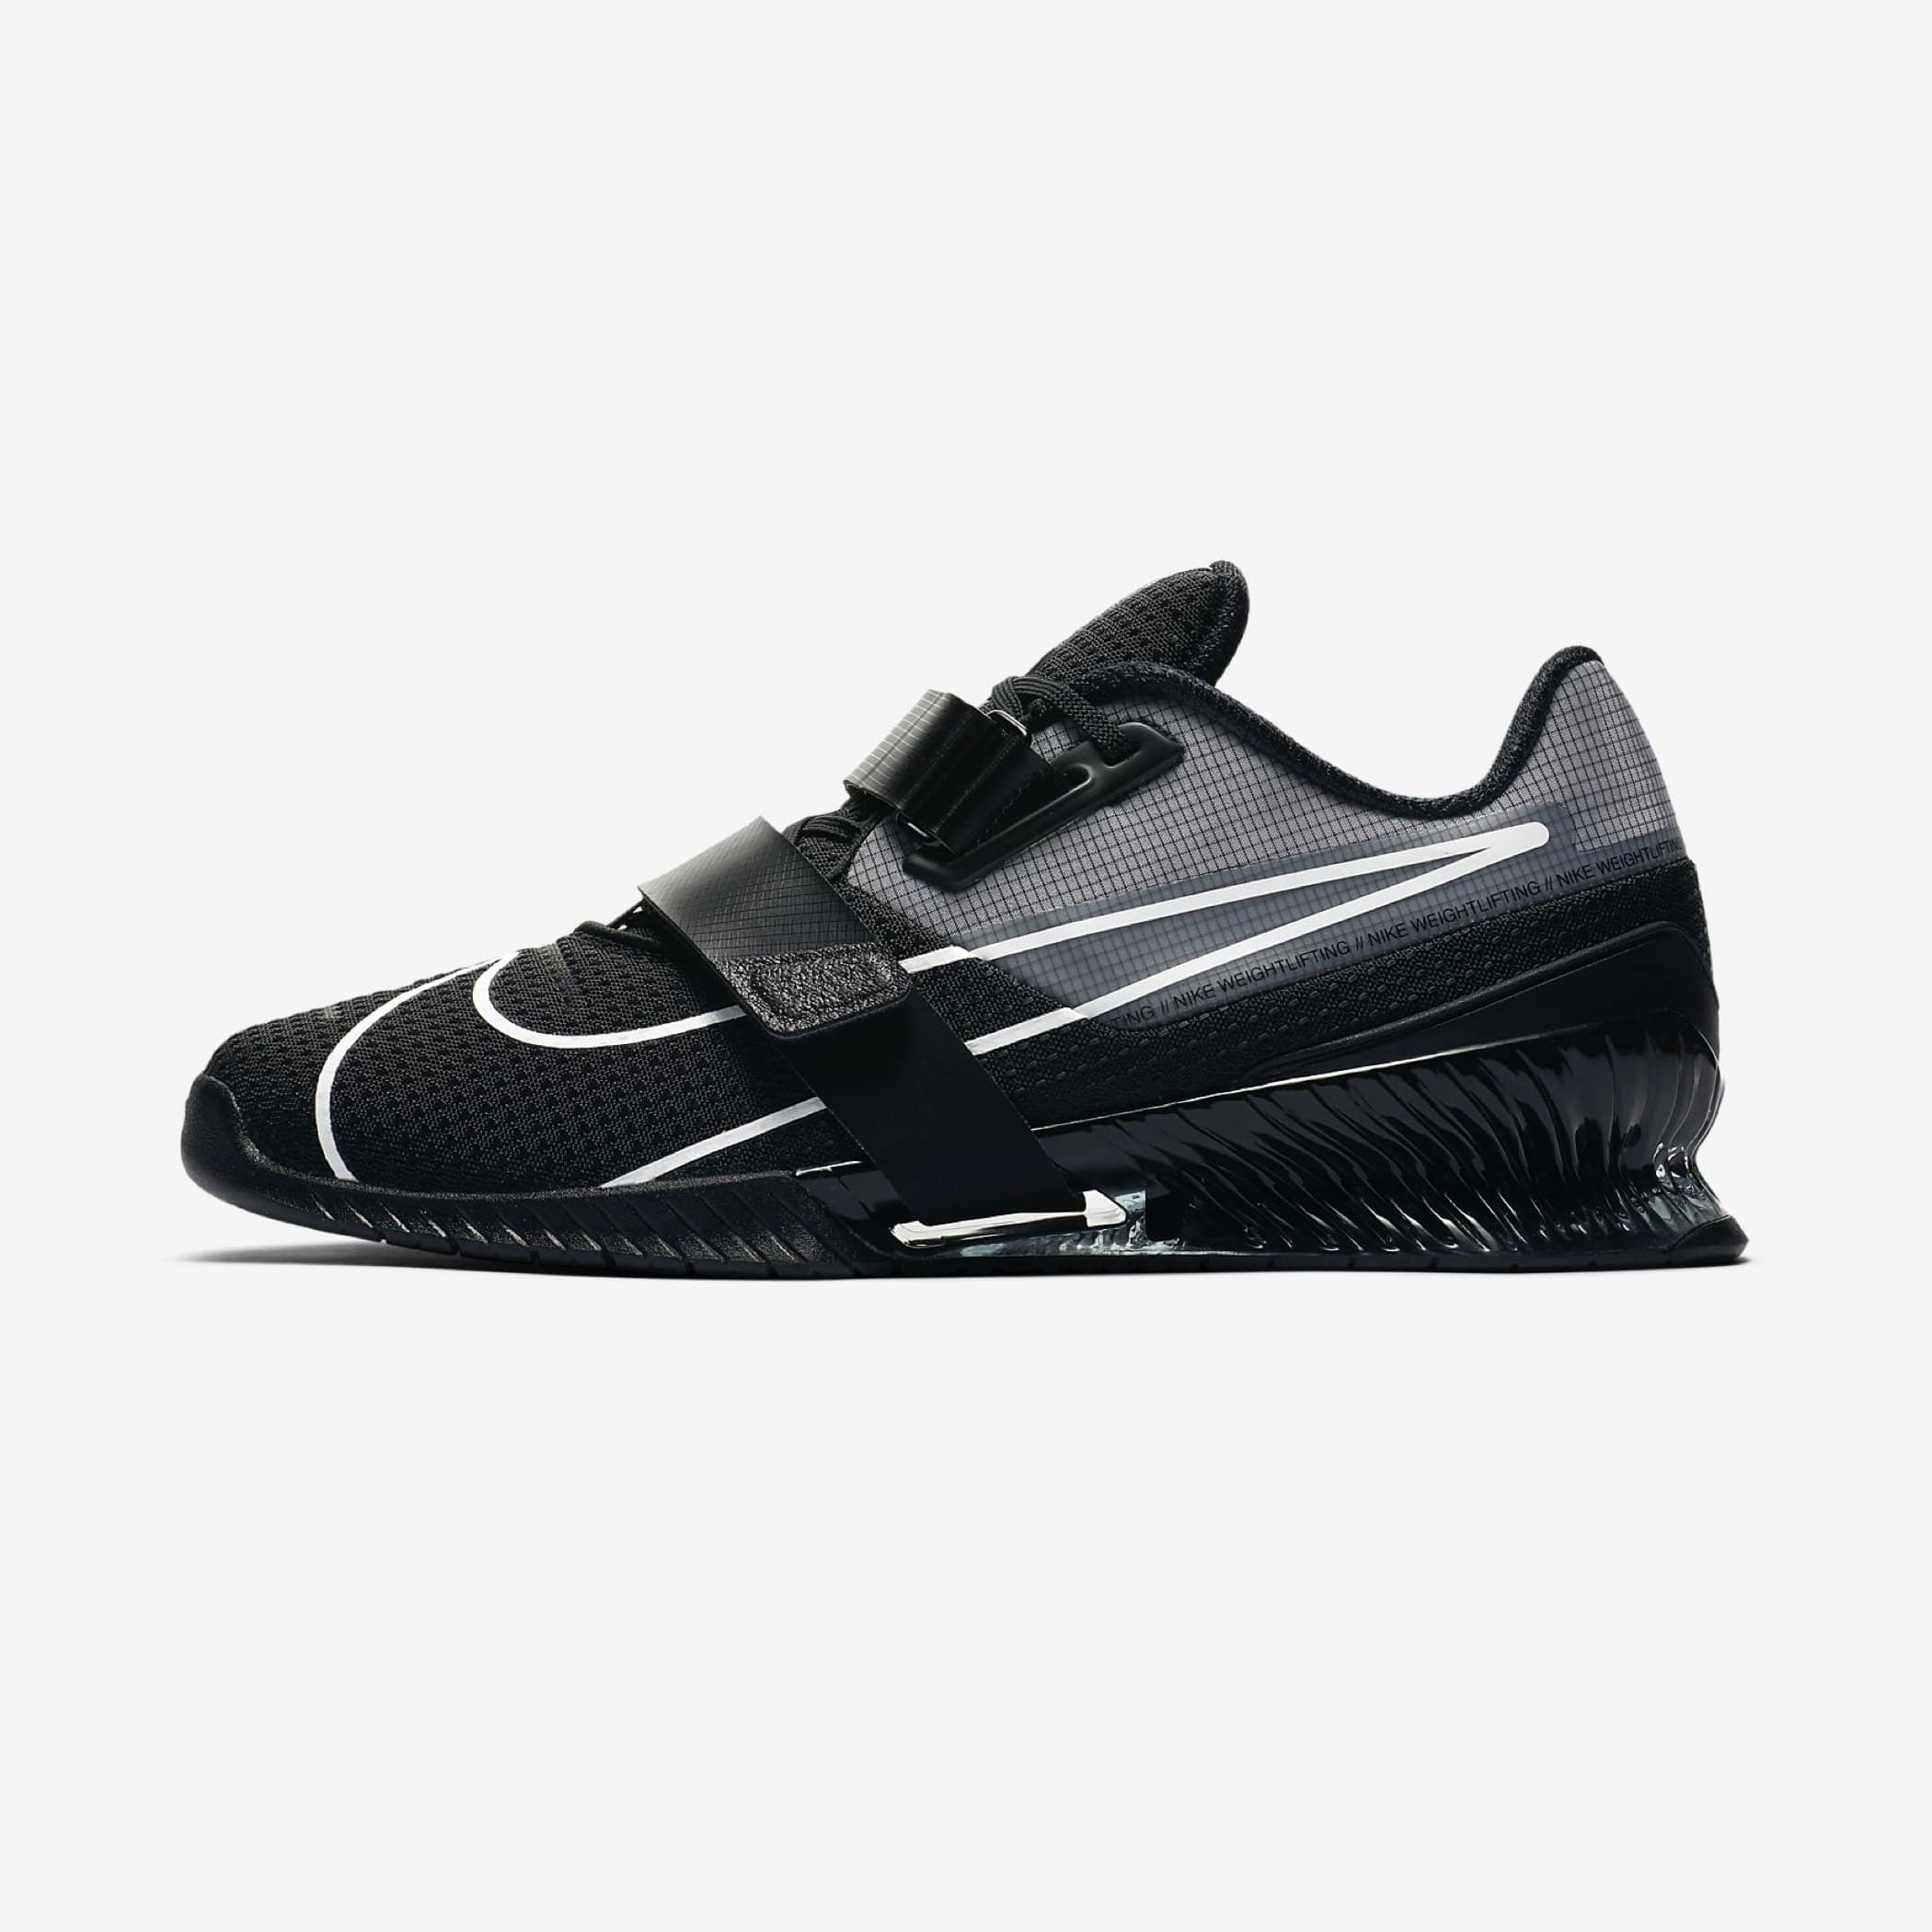 Nike 4 Weightlifting Shoes Black WIT Fitness